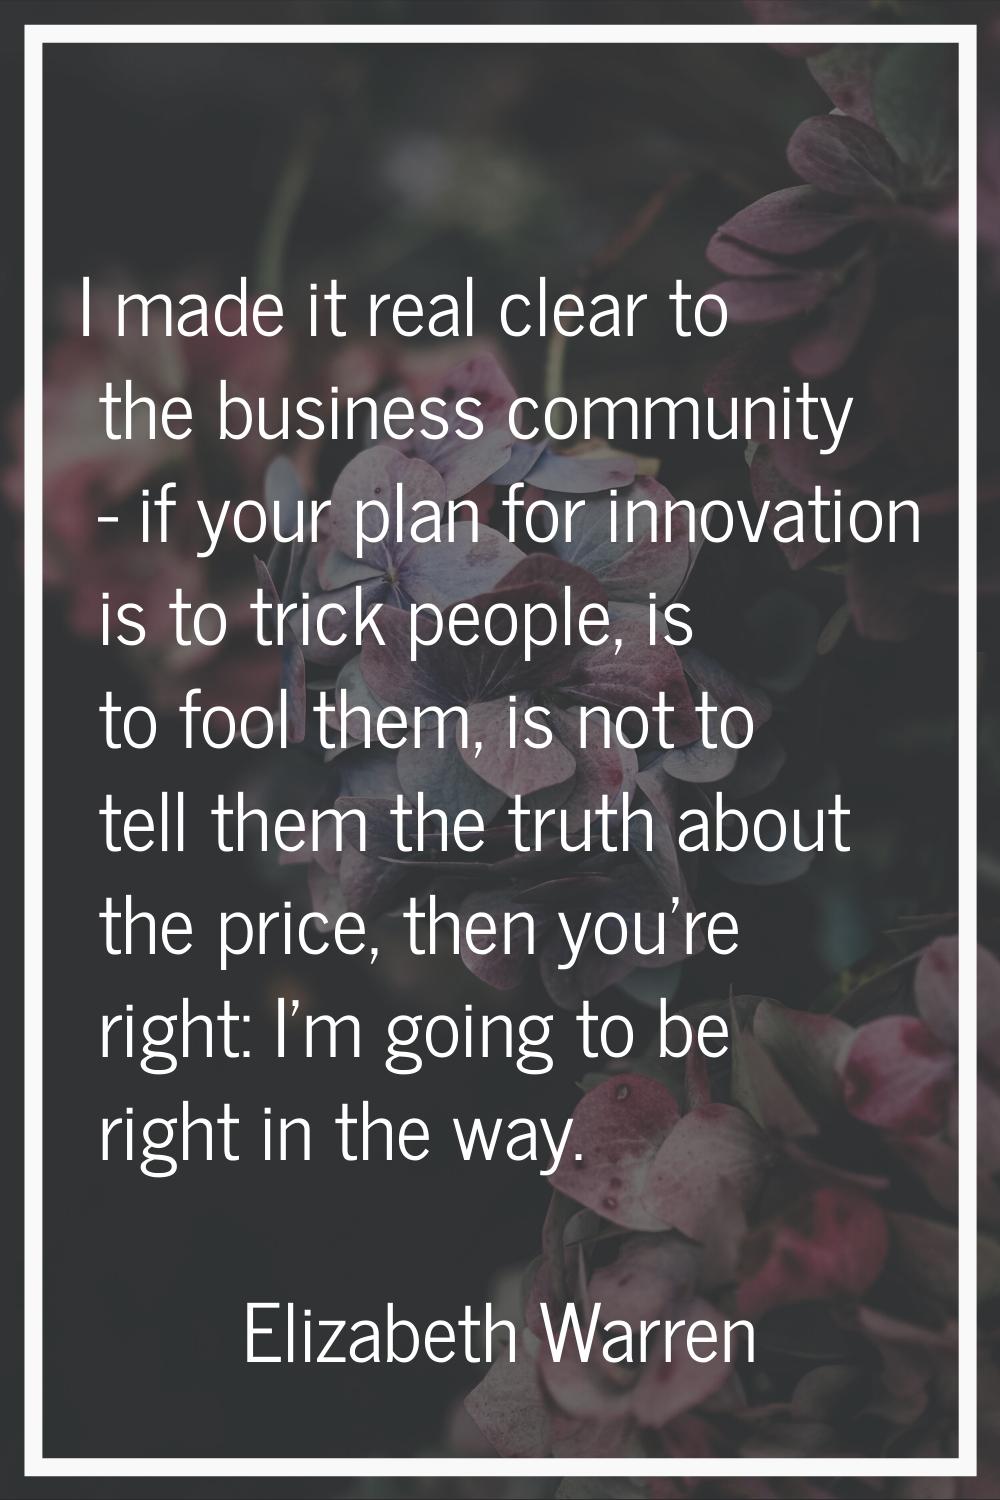 I made it real clear to the business community - if your plan for innovation is to trick people, is